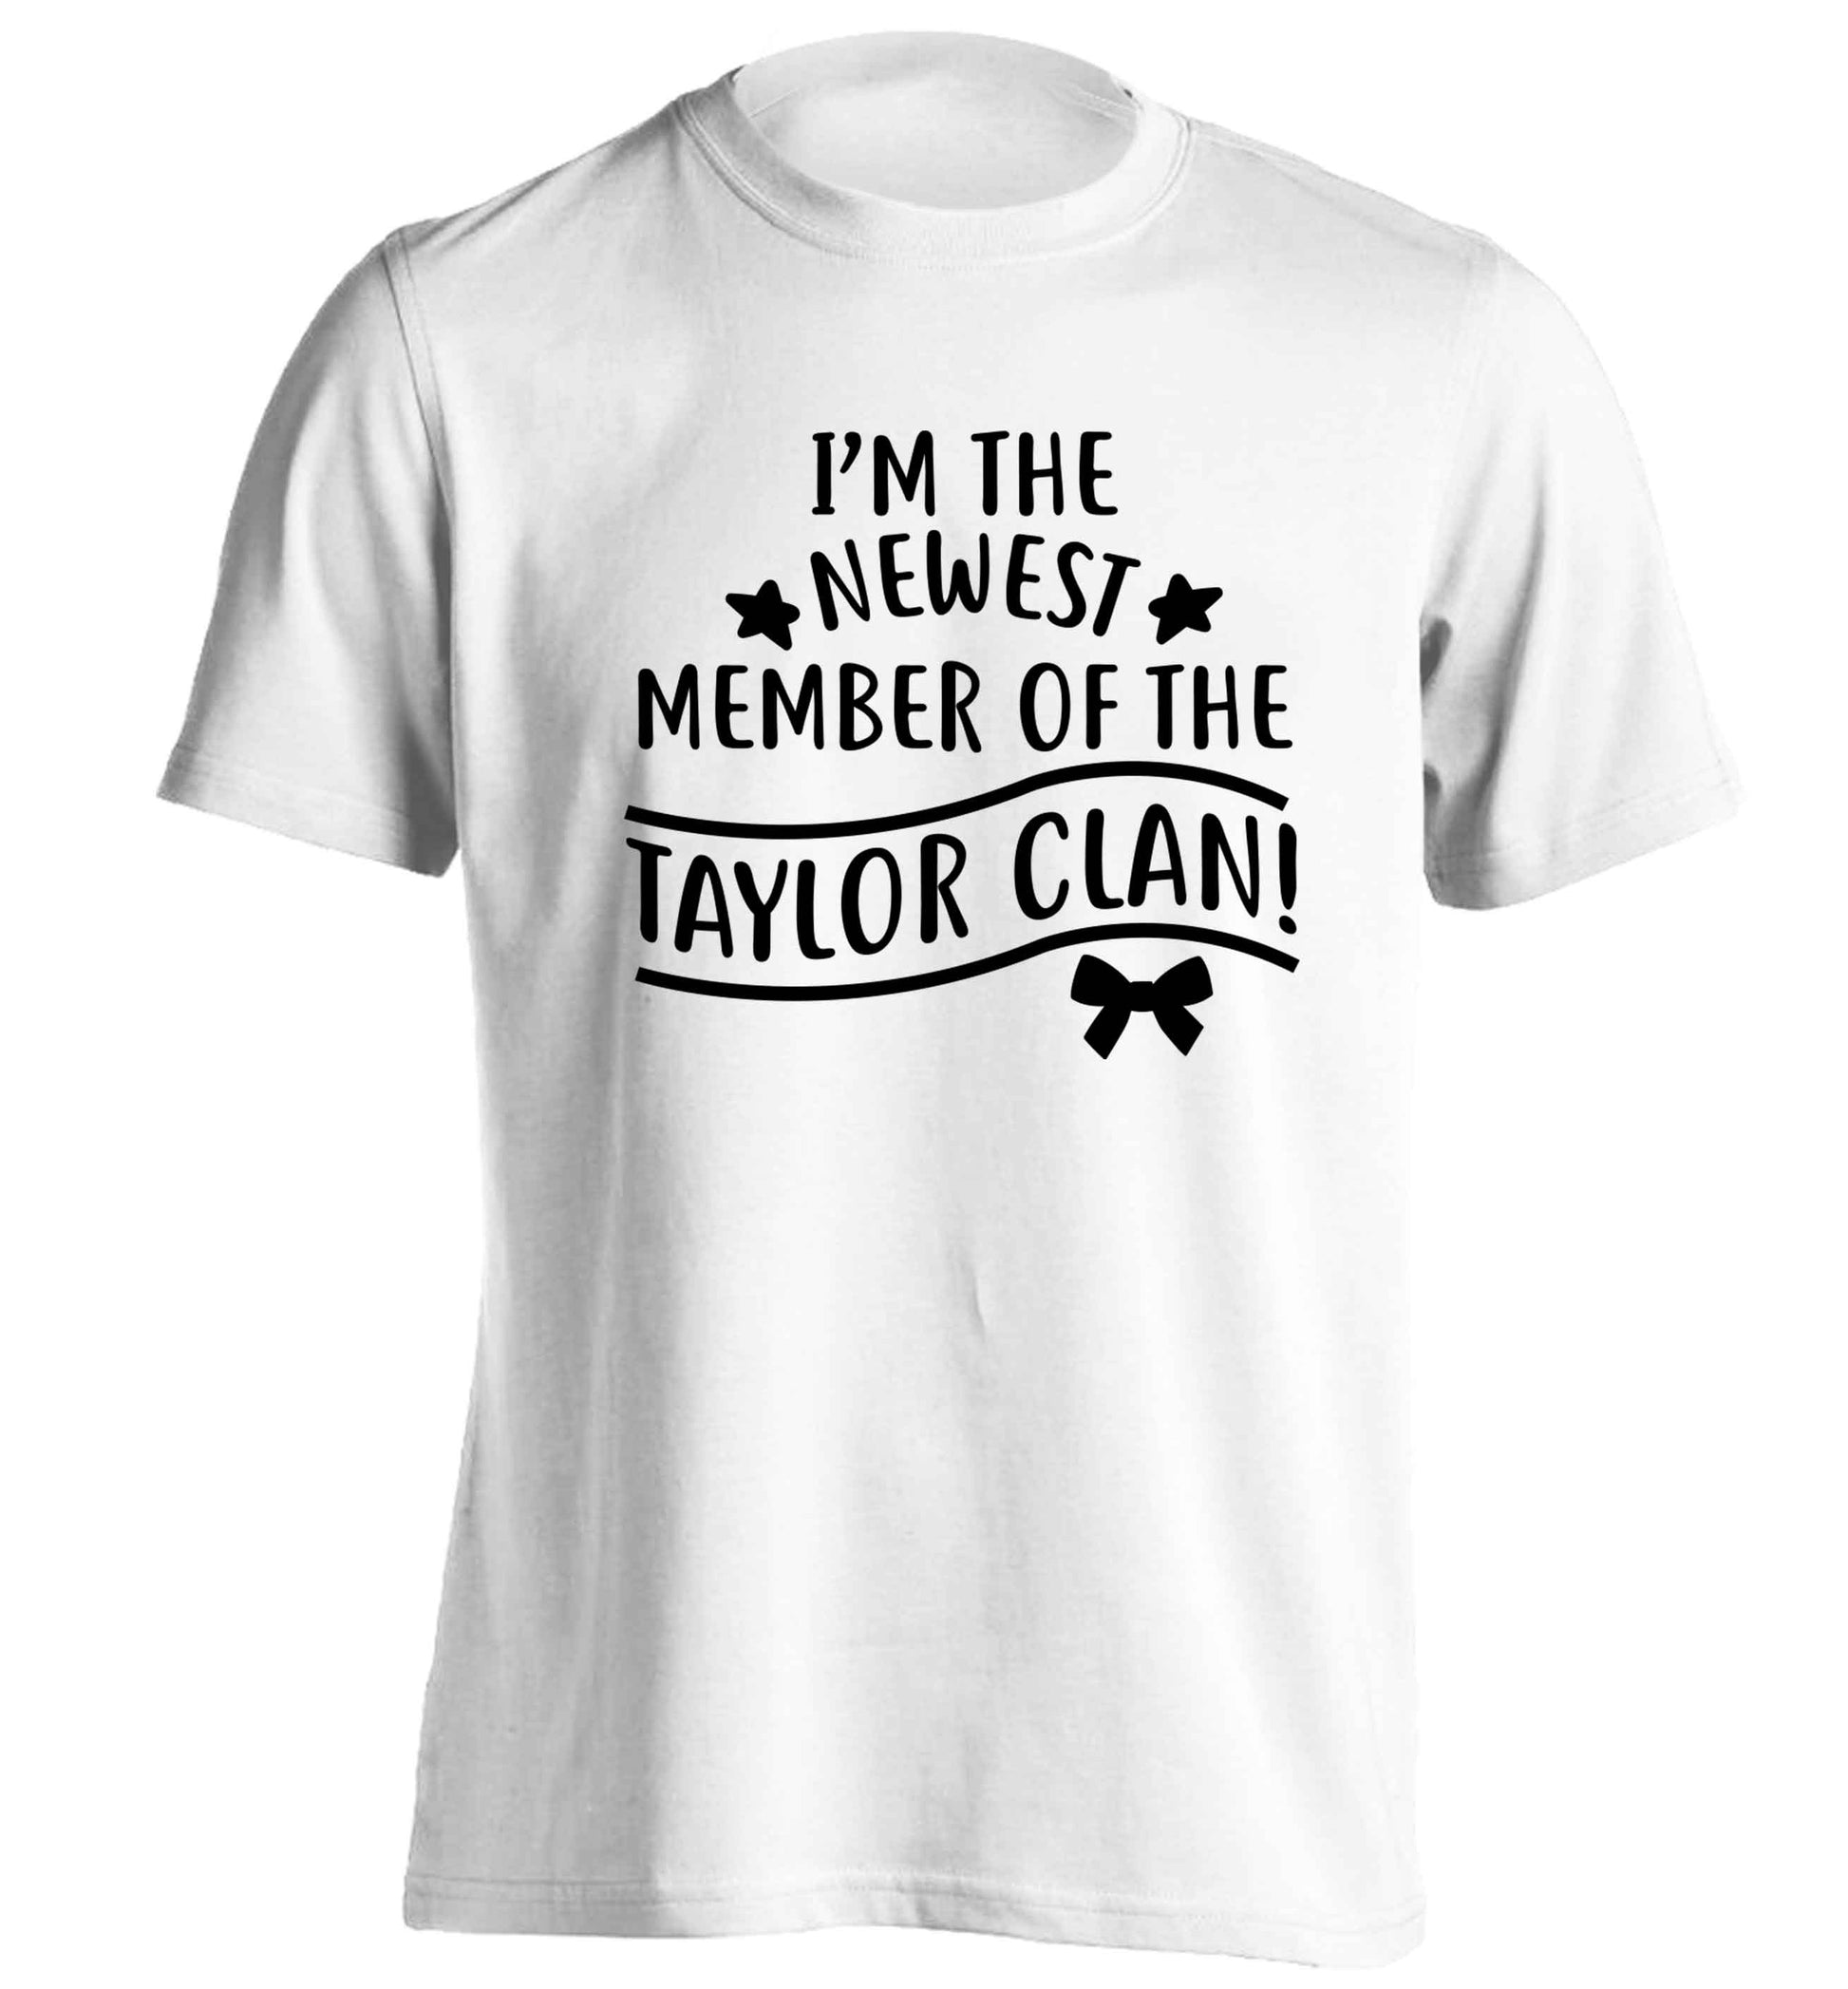 Personalised, newest member of the Taylor clan adults unisex white Tshirt 2XL